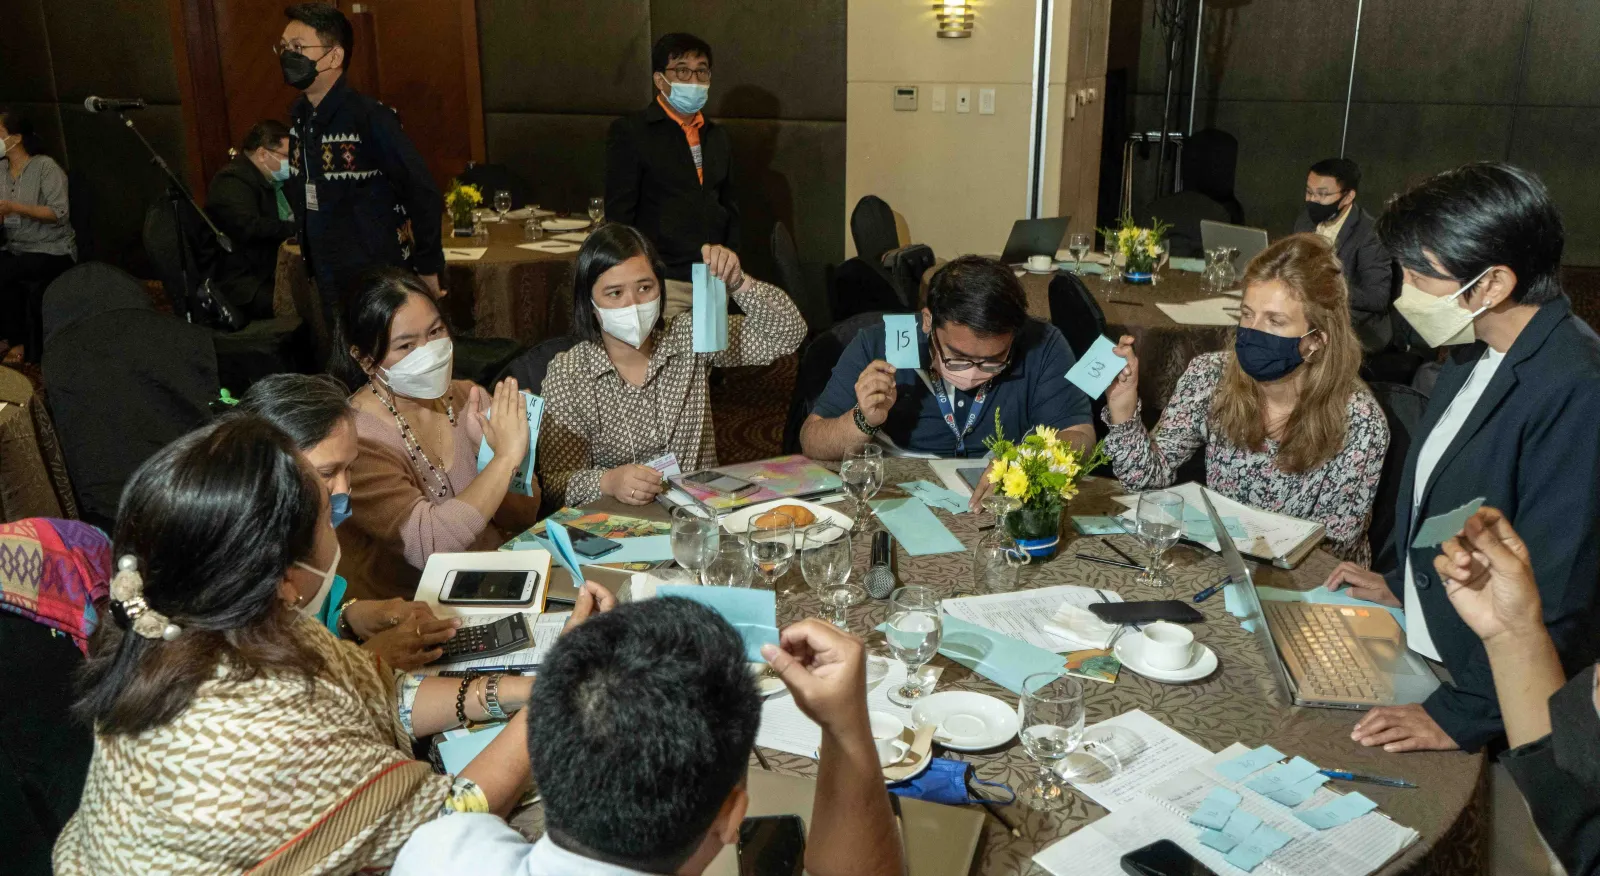 A group of people wearing masks are sitting around the table, actively working on a project together. The table is covered with paper and tea cups.